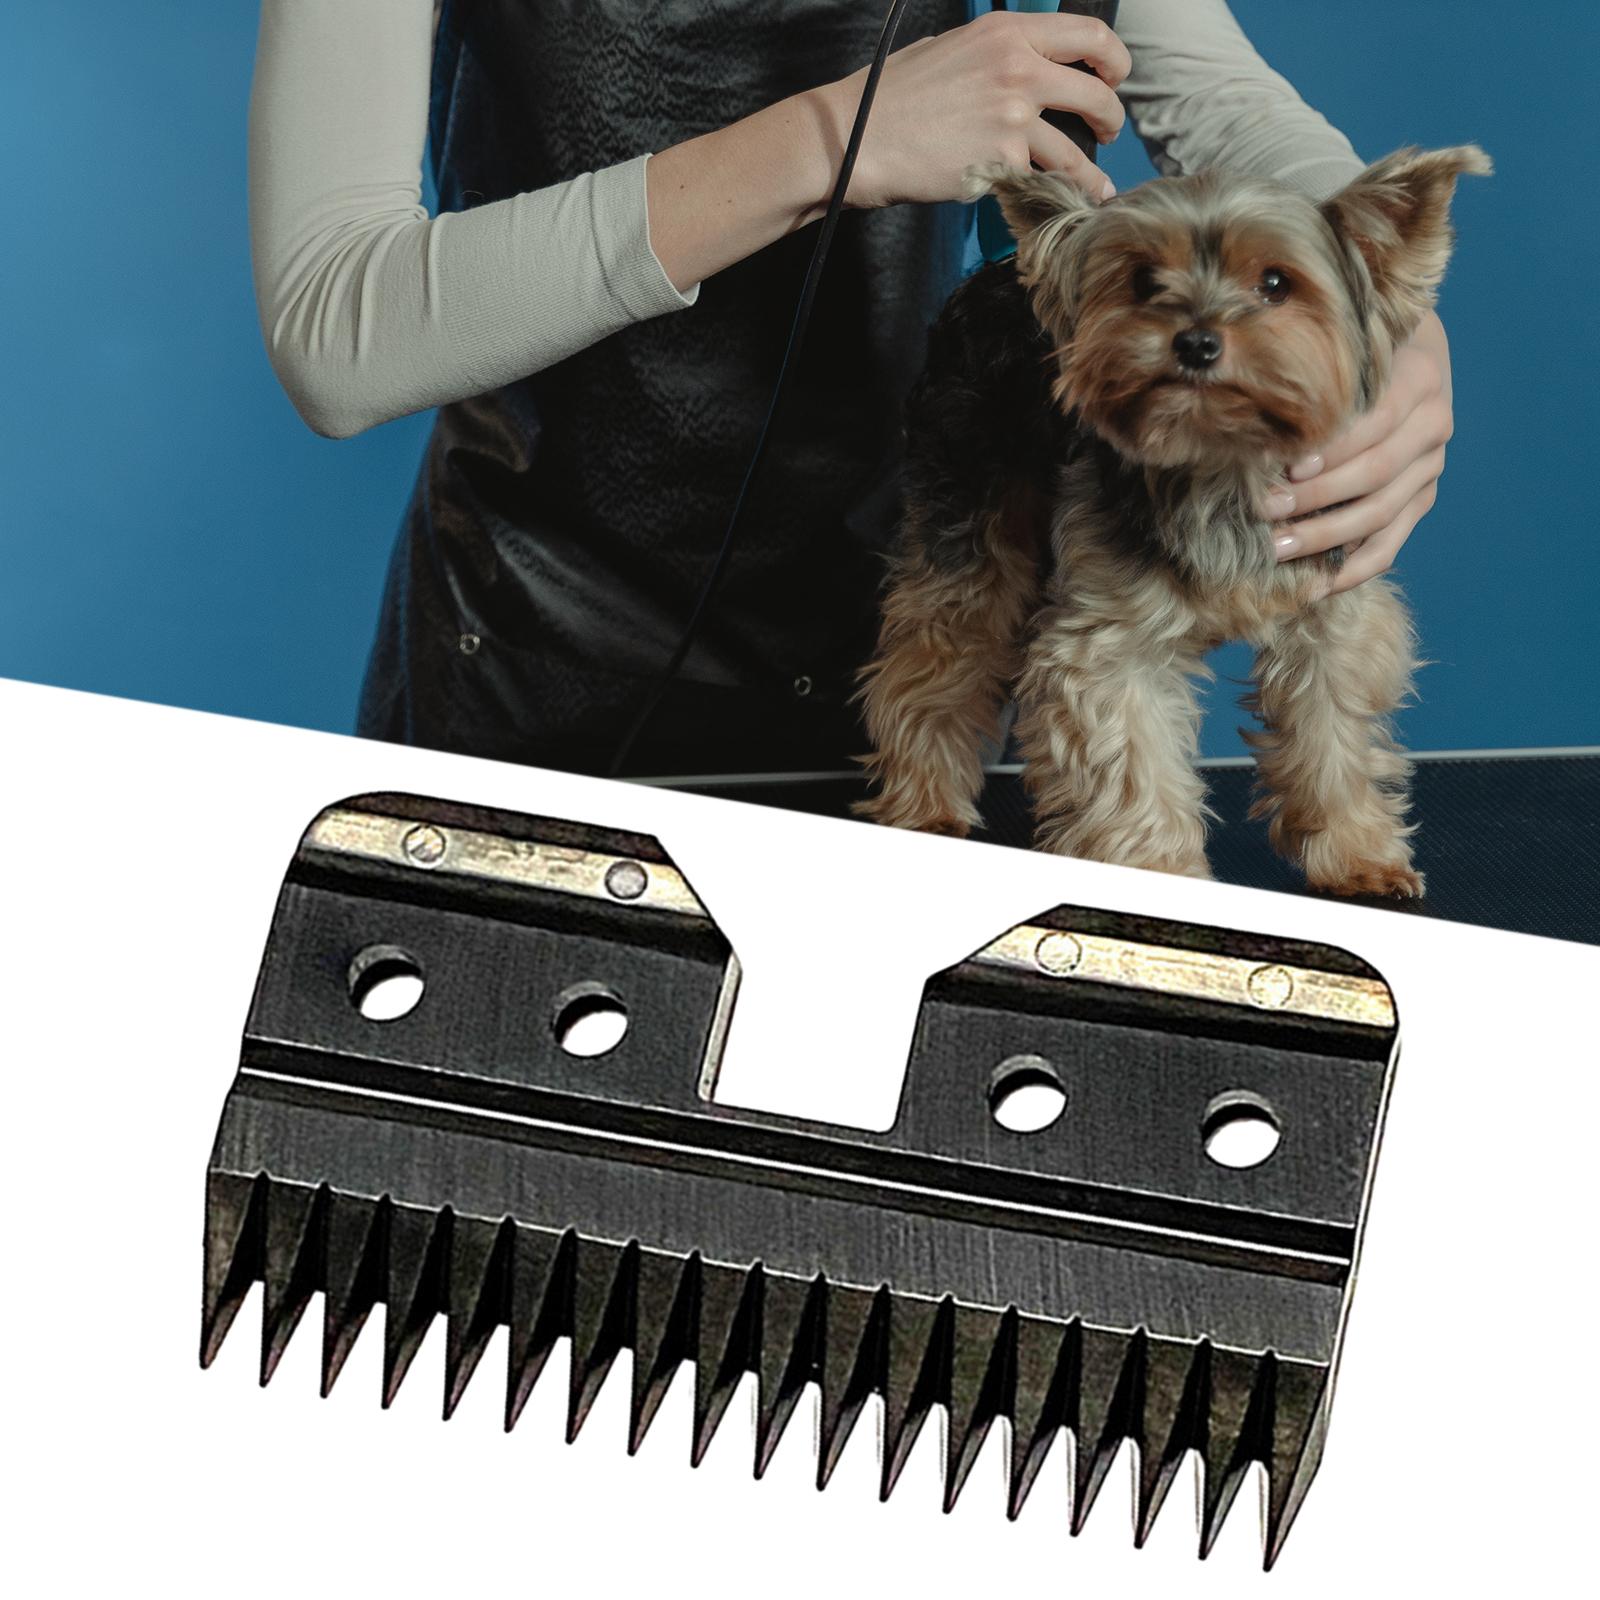 Aimishion Dog Grooming Clippers Trimmer Head 18 Tooth Cutter Head for A5